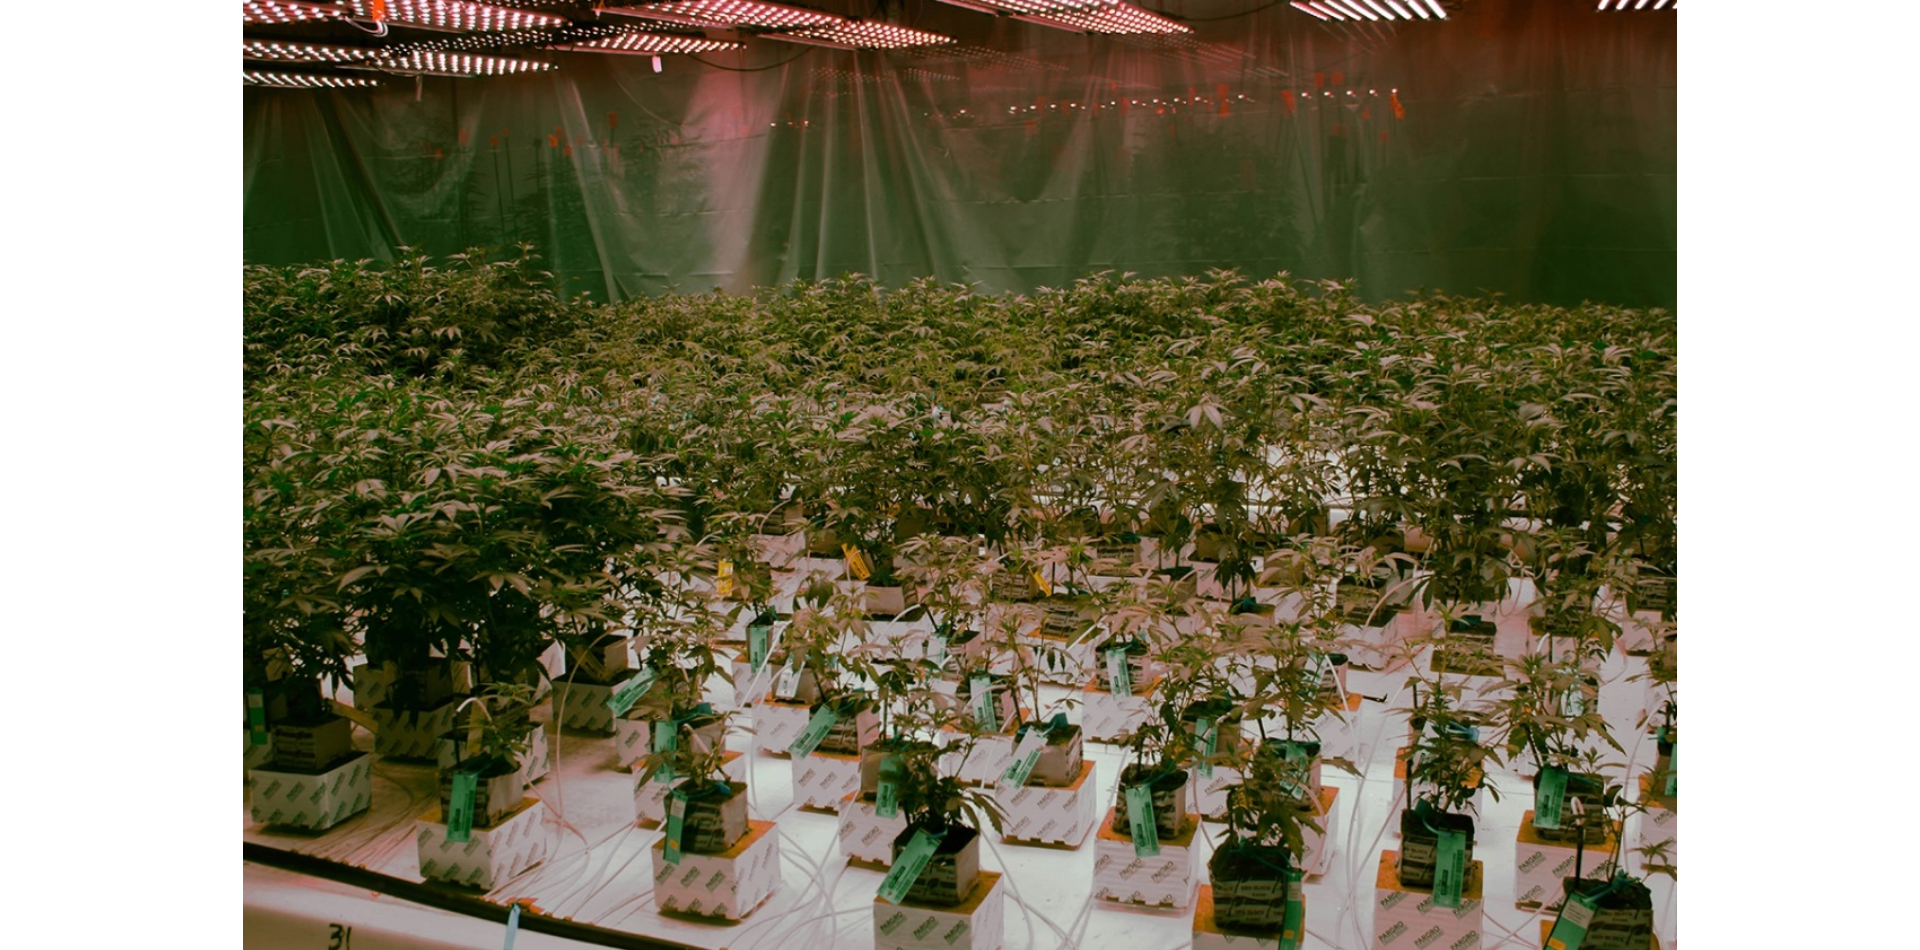 American pot is the gold standard. But Canada leads the export game — for now